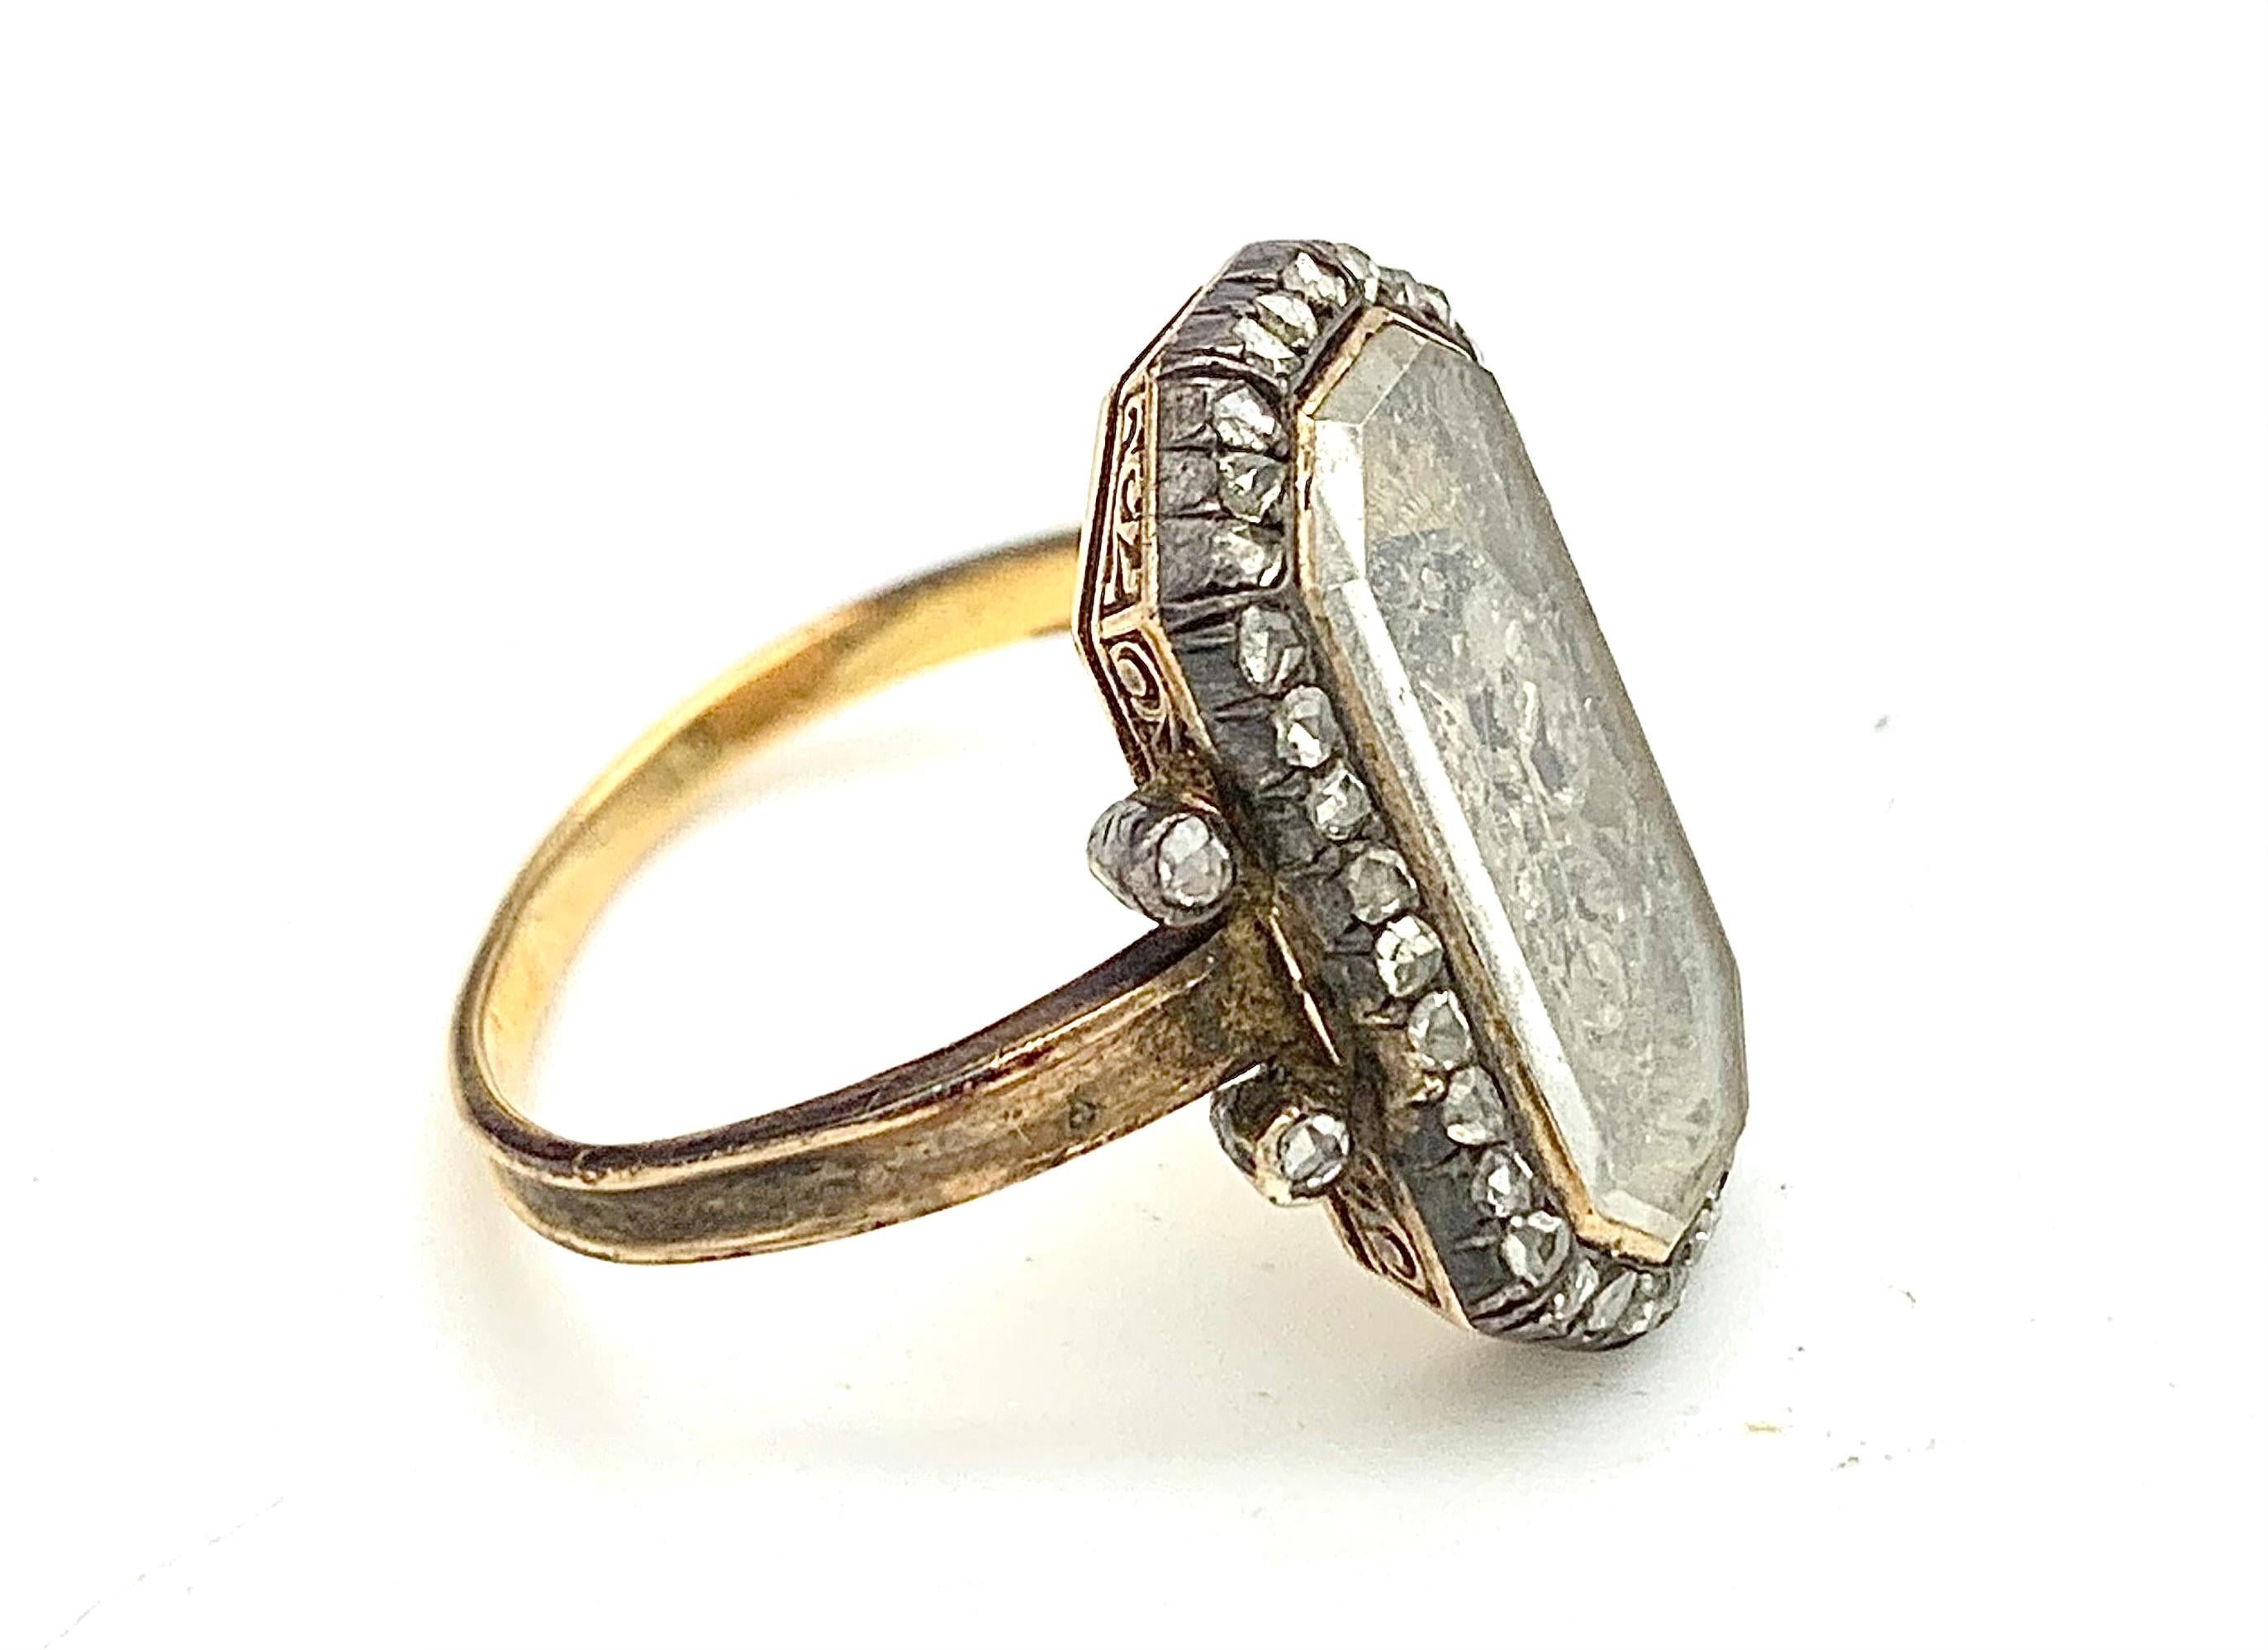 The octagonal ring features initials made out of silver and set with rose diamonds. The initials are underlaied with fabric and covered by the original bevelled glas in an octagonal gold mount.   The gold mound is surrounded by a silver border set